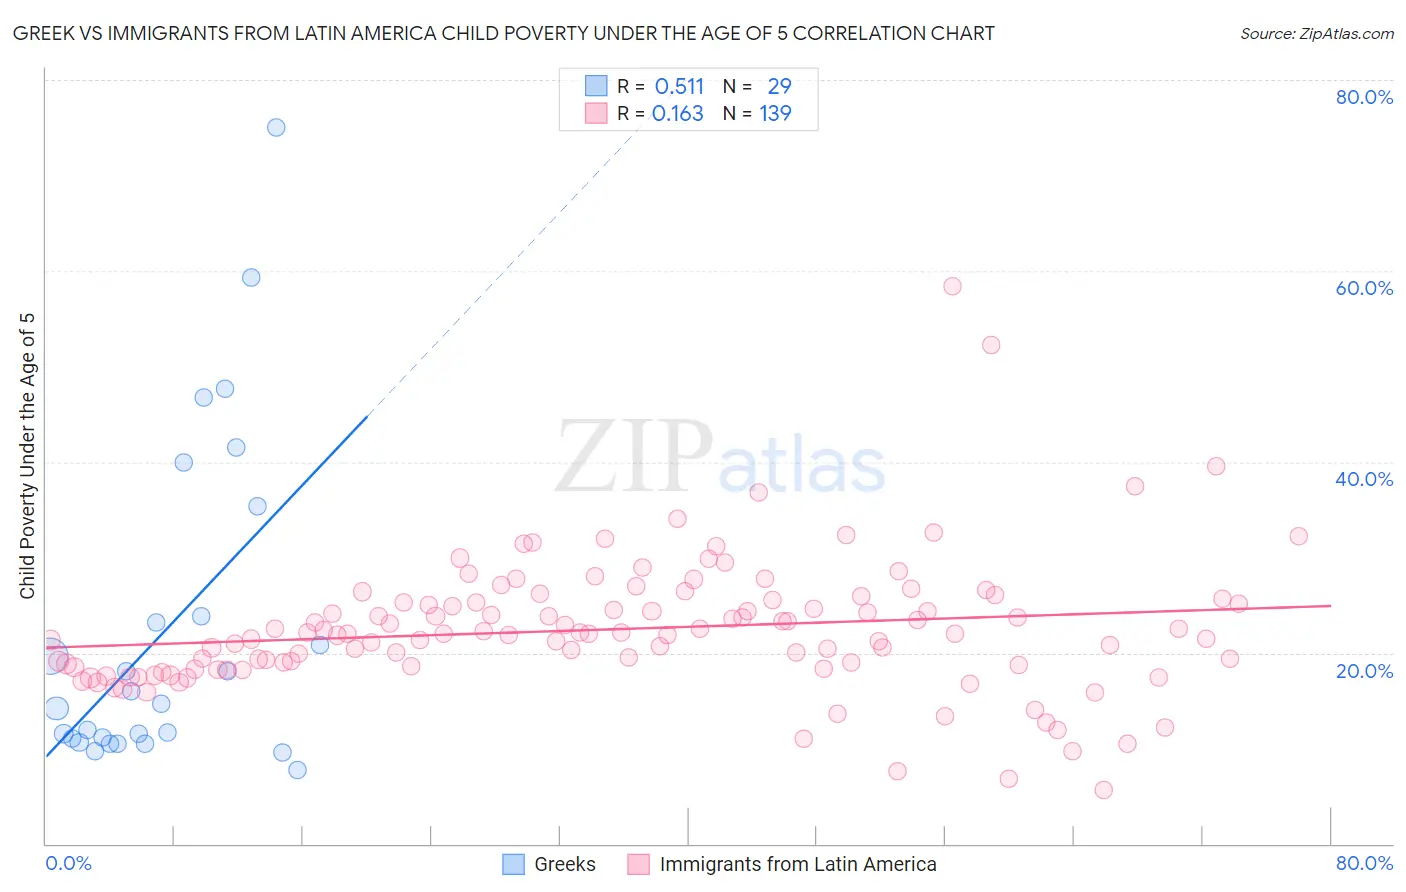 Greek vs Immigrants from Latin America Child Poverty Under the Age of 5